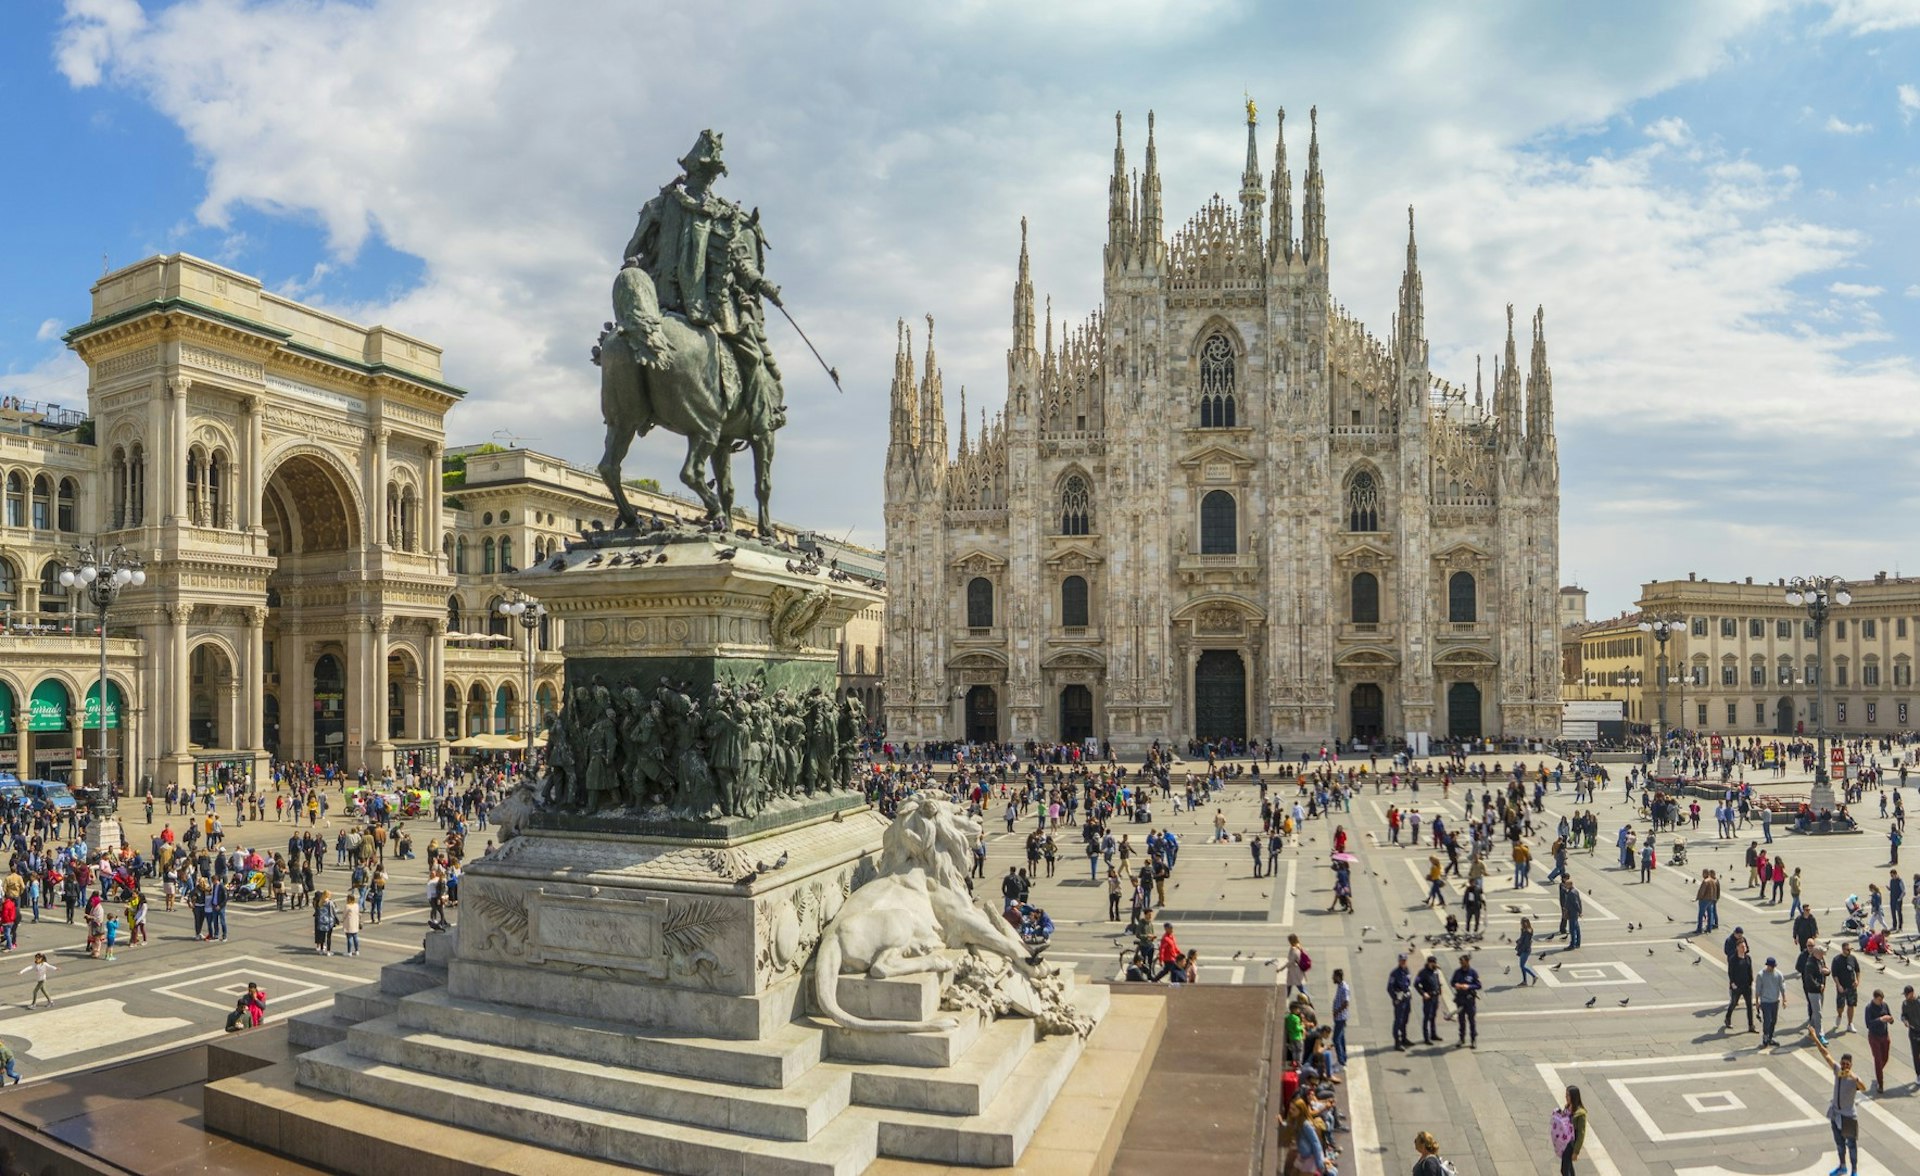 A view of the Piazza del Duomo, the Cathedral and equestrian monument to Vittorio Emanuele II in Milan. Crowds of people walk around the large square.